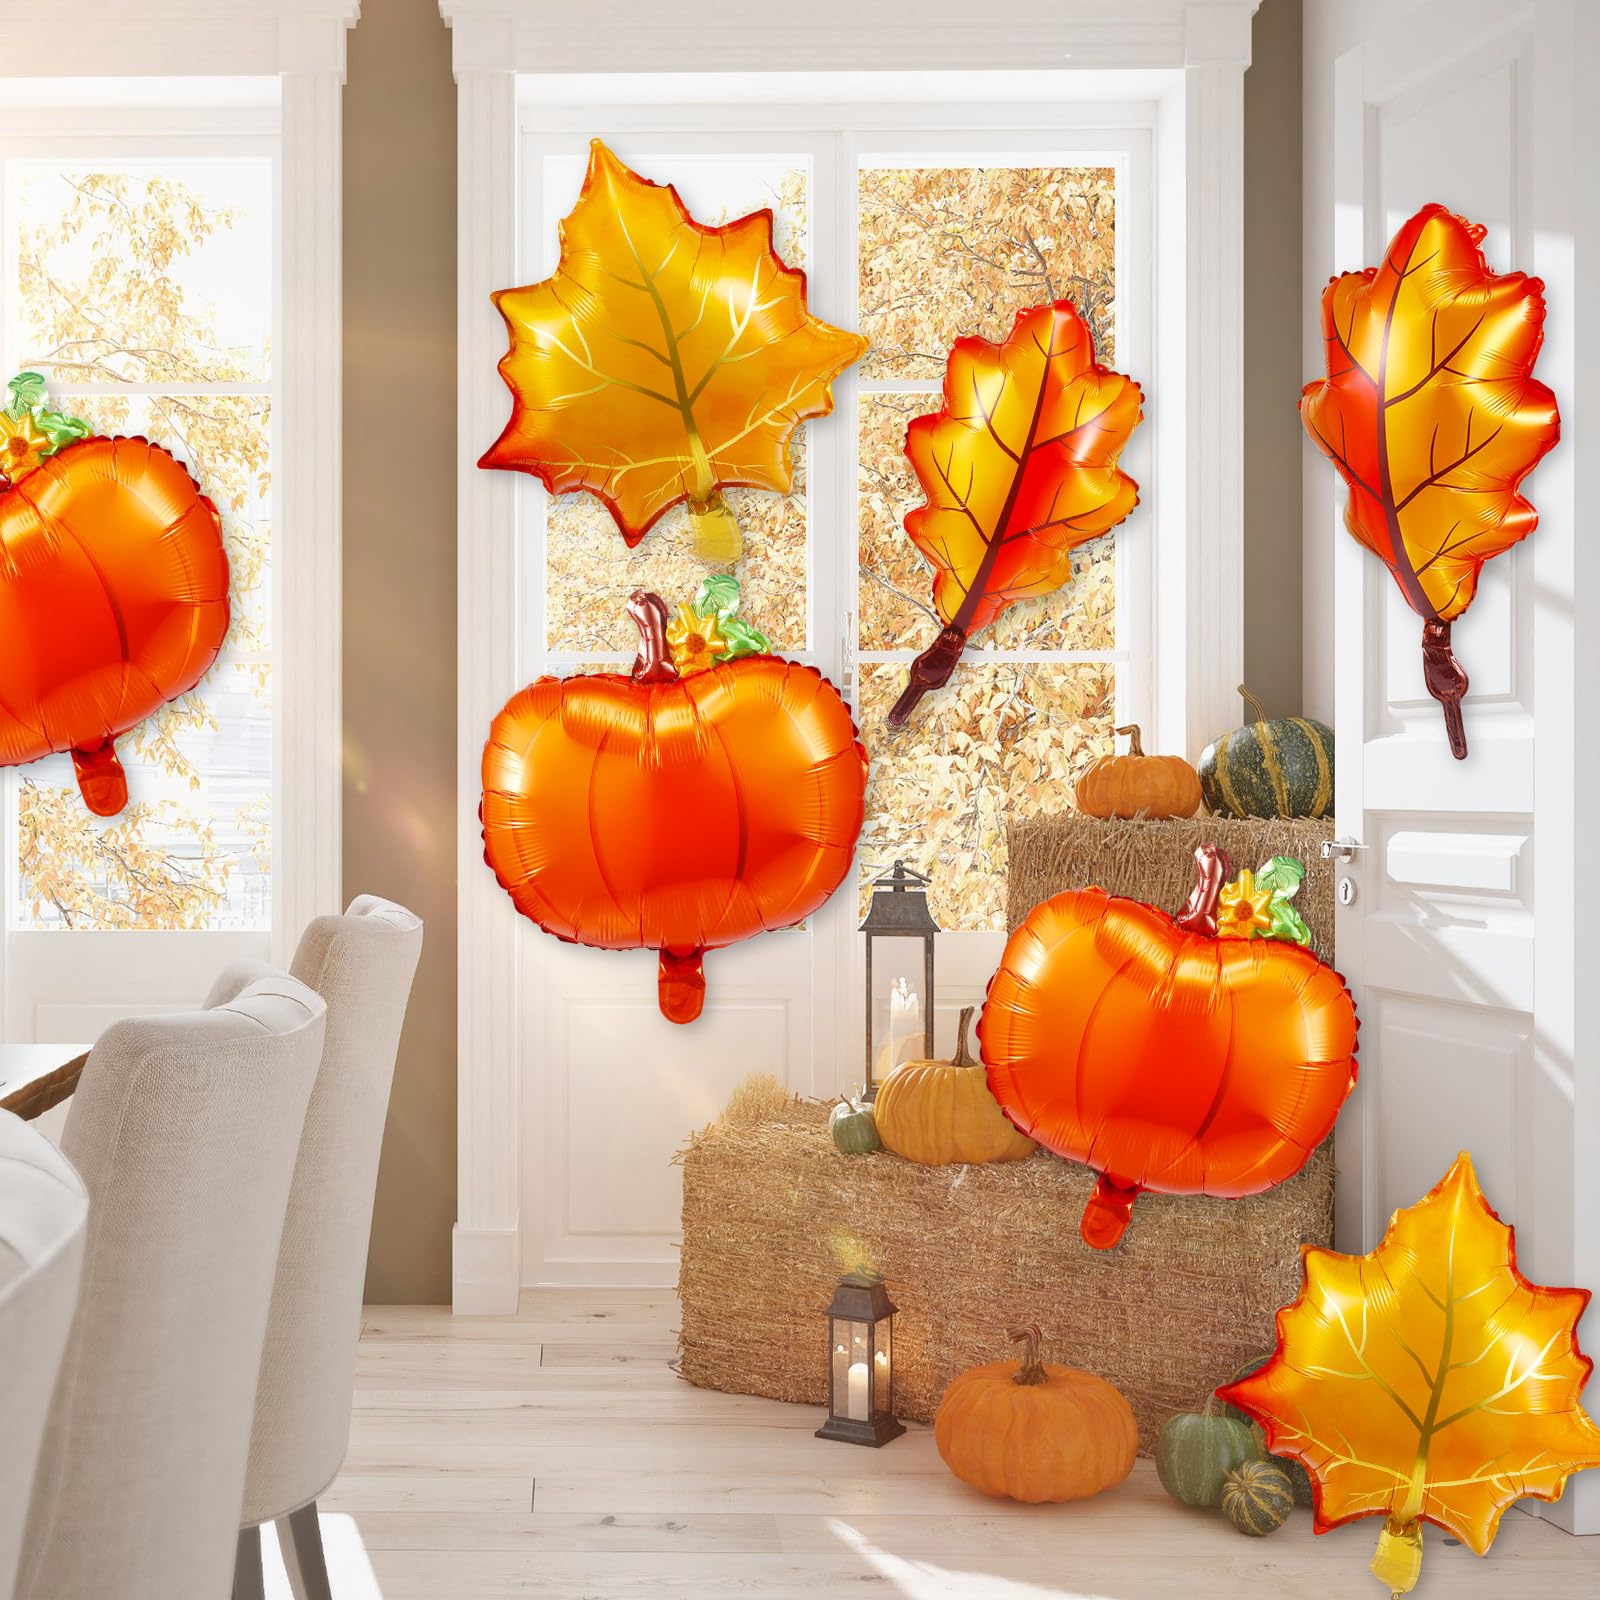 Liliful 30 Pcs Thanksgiving Balloons Decorations Large Fall Foil Balloons Pumpkin Balloons Orange Maple Leaf Balloons for Autumn Harvest Festival Party Decoration Birthday Baby Shower Party Supplies